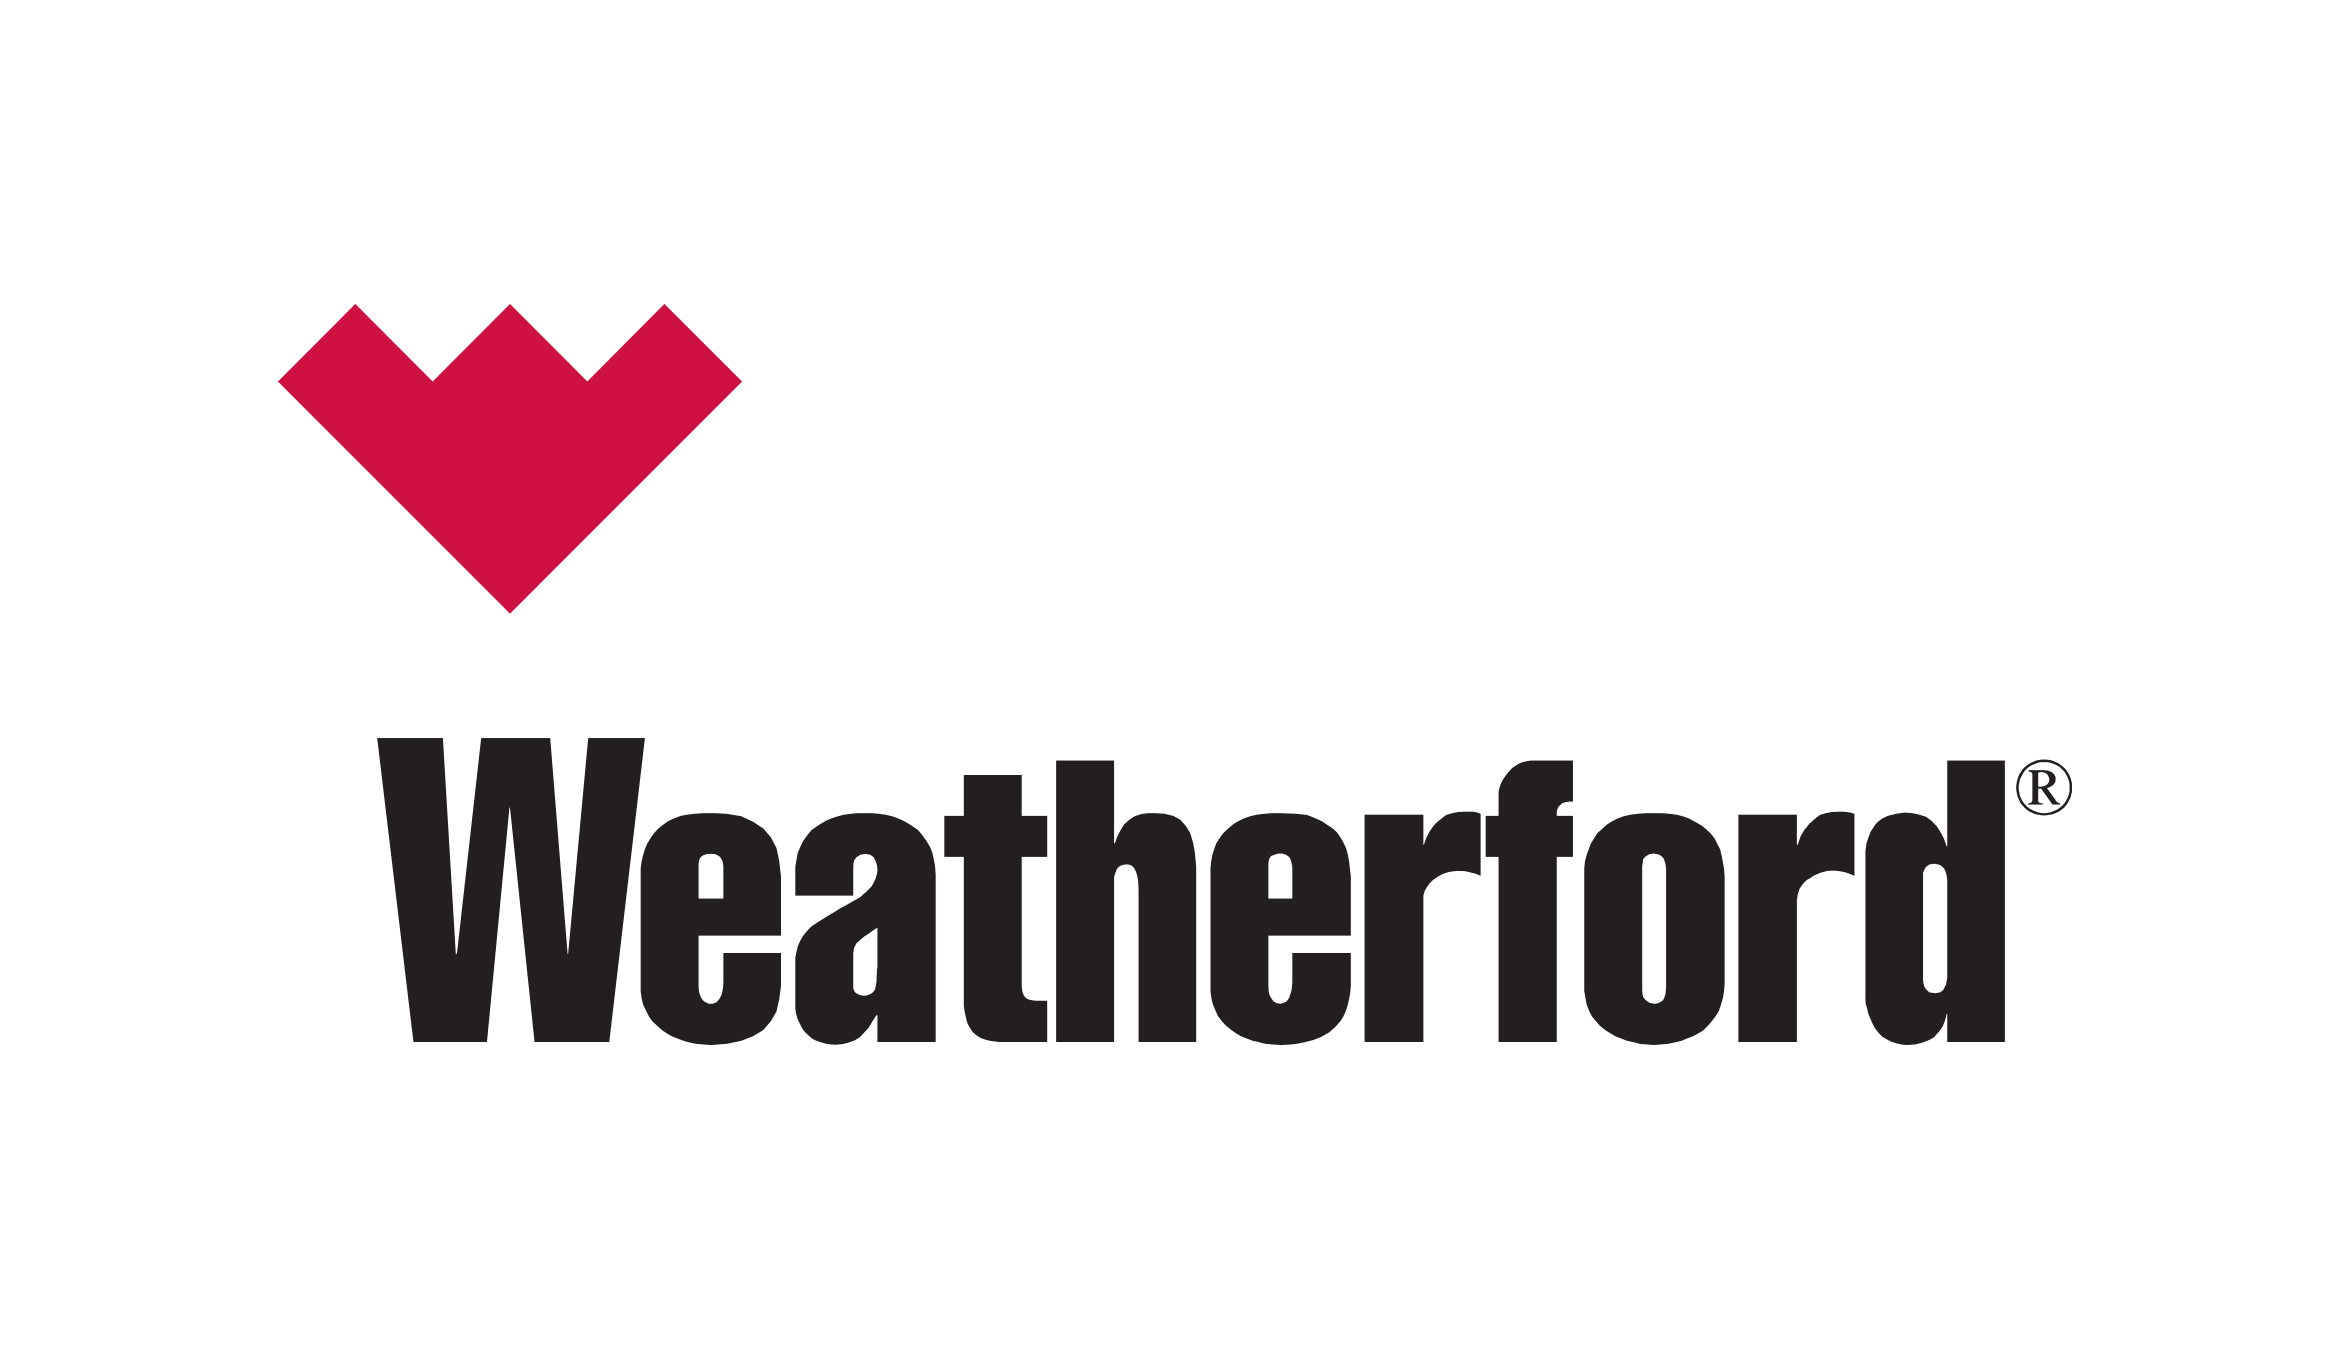 Weatherford Announces Upgrade in Credit Rating To ''B+'' From ''B'', Outlook Positive